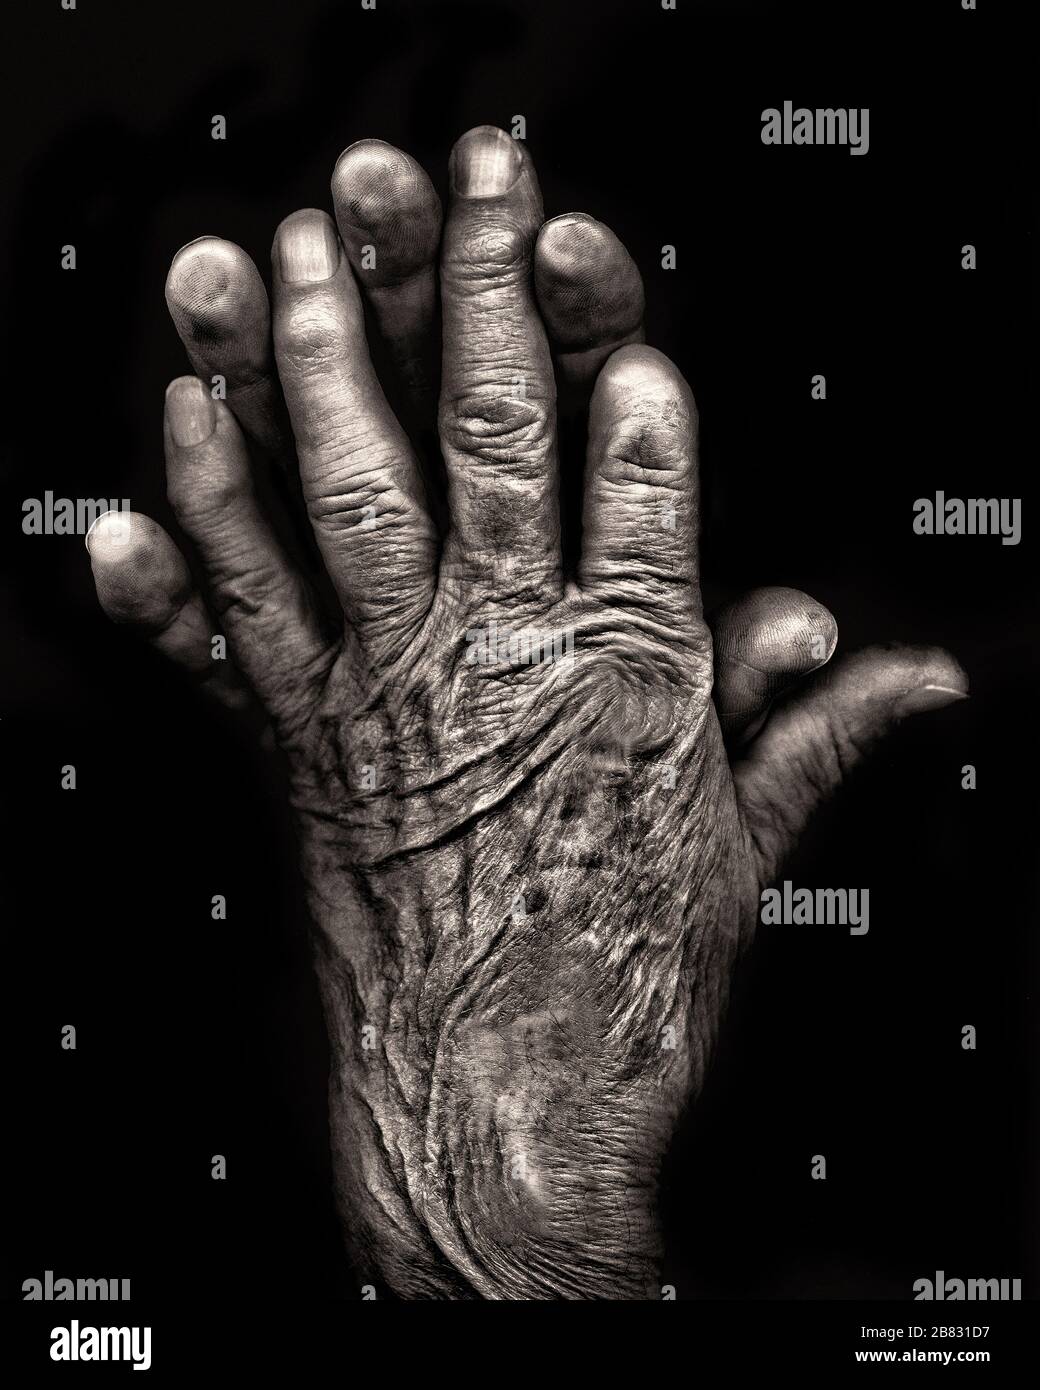 Two Wrinkled Hands against Black Background Stock Photo